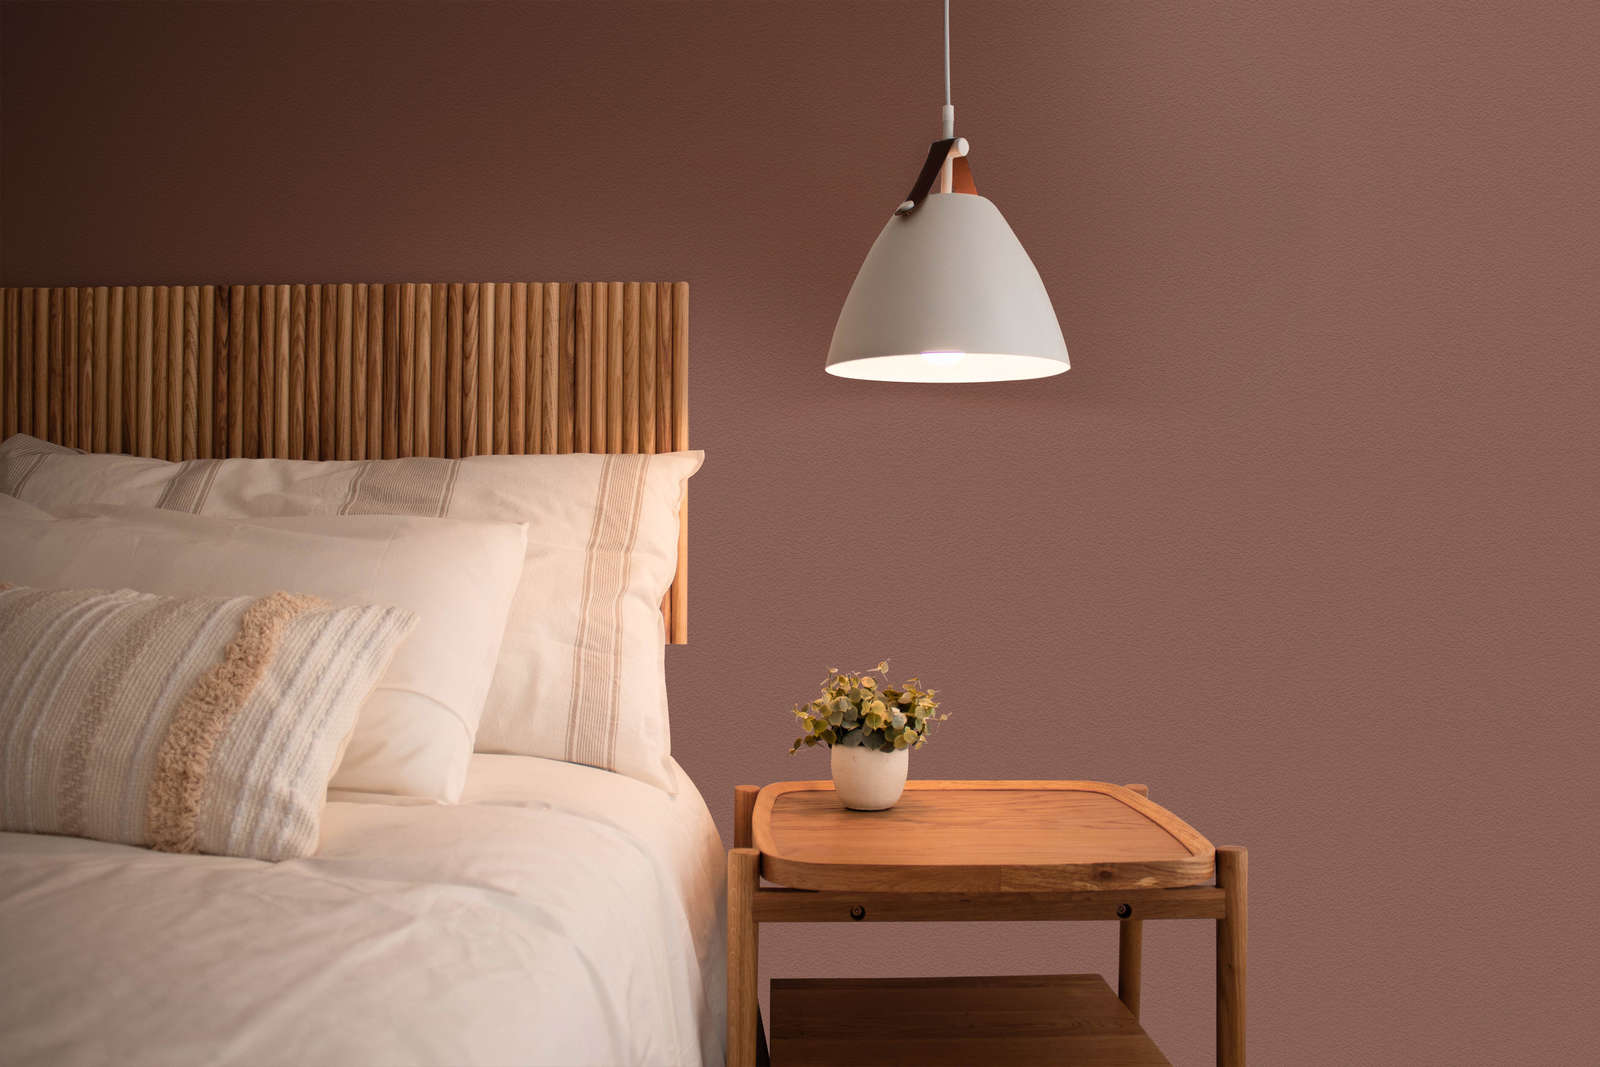             Wall Paint TCK5014 »Reddish Chestnut« in magnificent red-brown – 2.5 litre
        